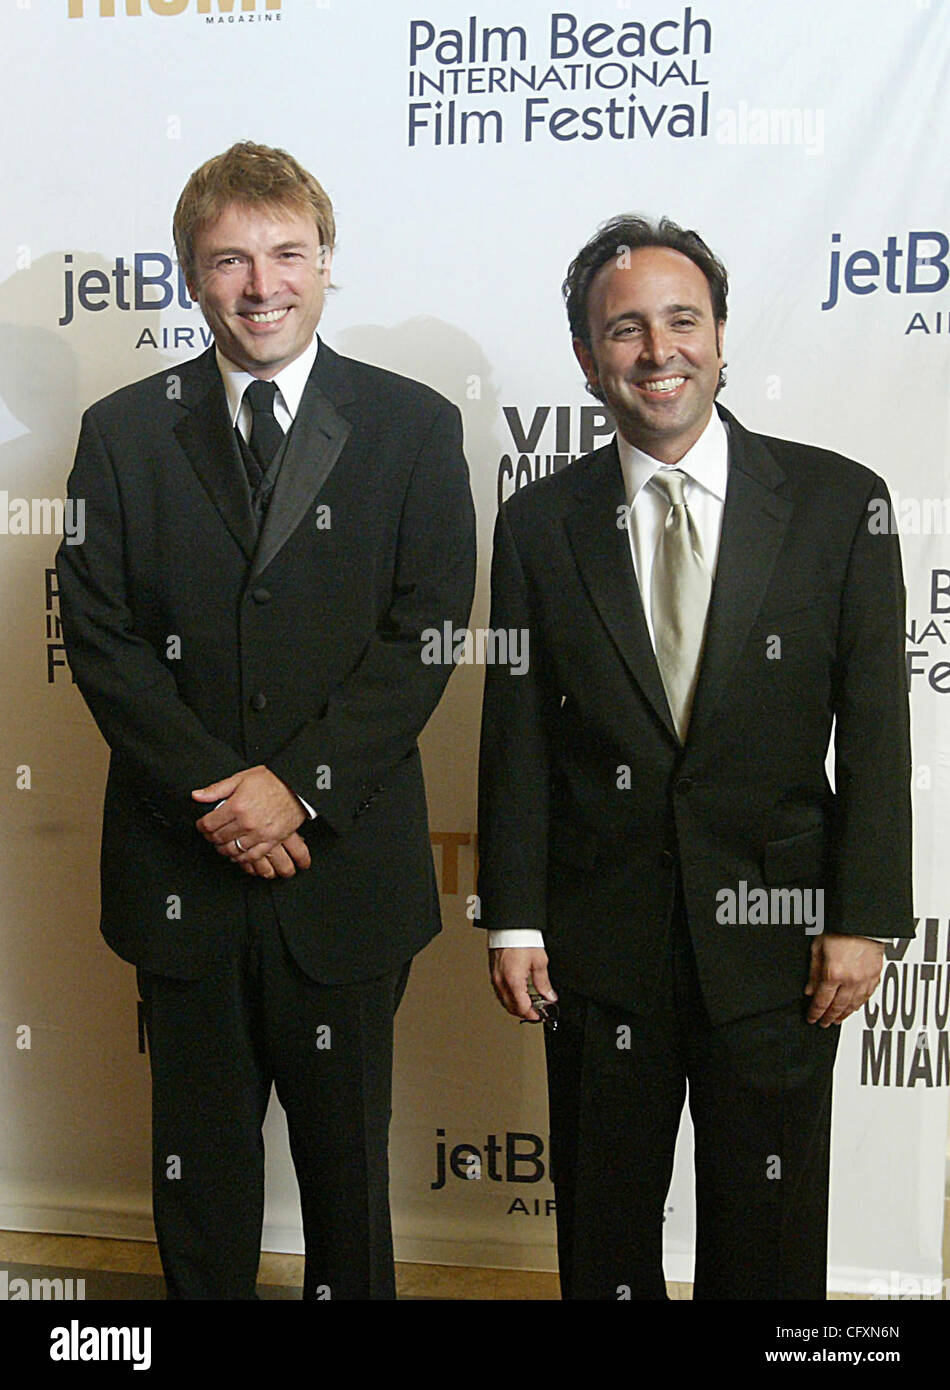 042107 met Filmfest   Photo by Damon Higgins/The Palm Beach Post  0036840A - BOCA RATON - W/STORY BY HAP ERSTEIN - Adam Massey (l) and Lincoln Stalmaster make an entrance on the red carpet at the Boca Raton Resort & Club for the 2007 Palm Beach International Film Festival.  ....042107 Stock Photo